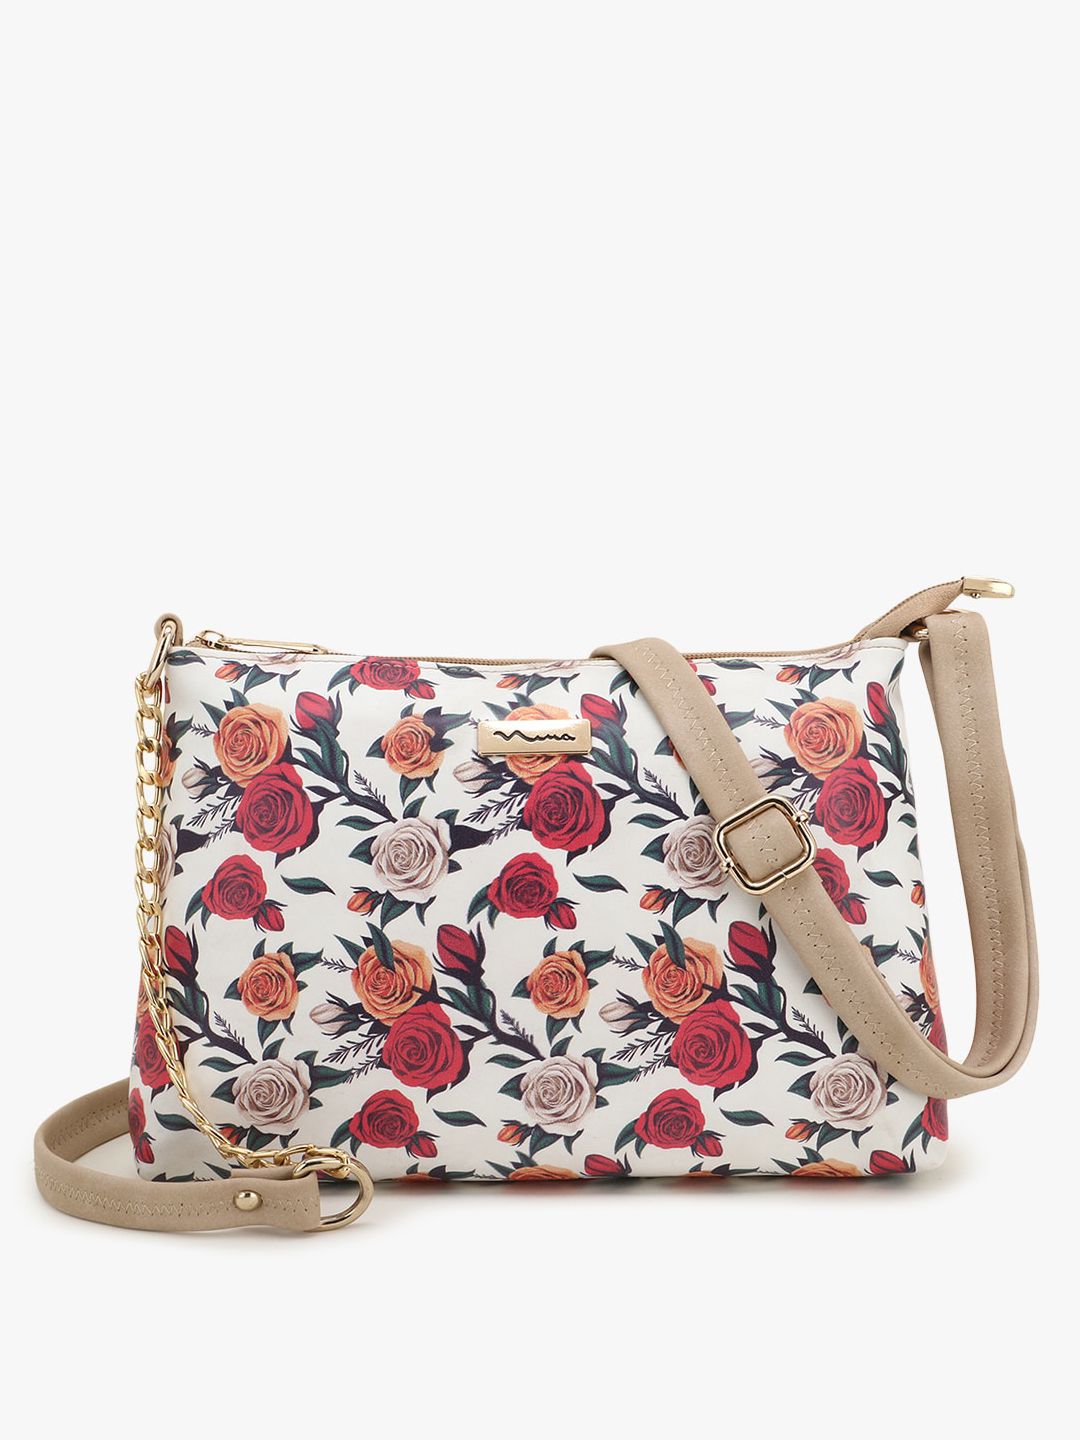 SHINING STAR Cream-Coloured Floral Printed PU Structured Sling Bag Price in India